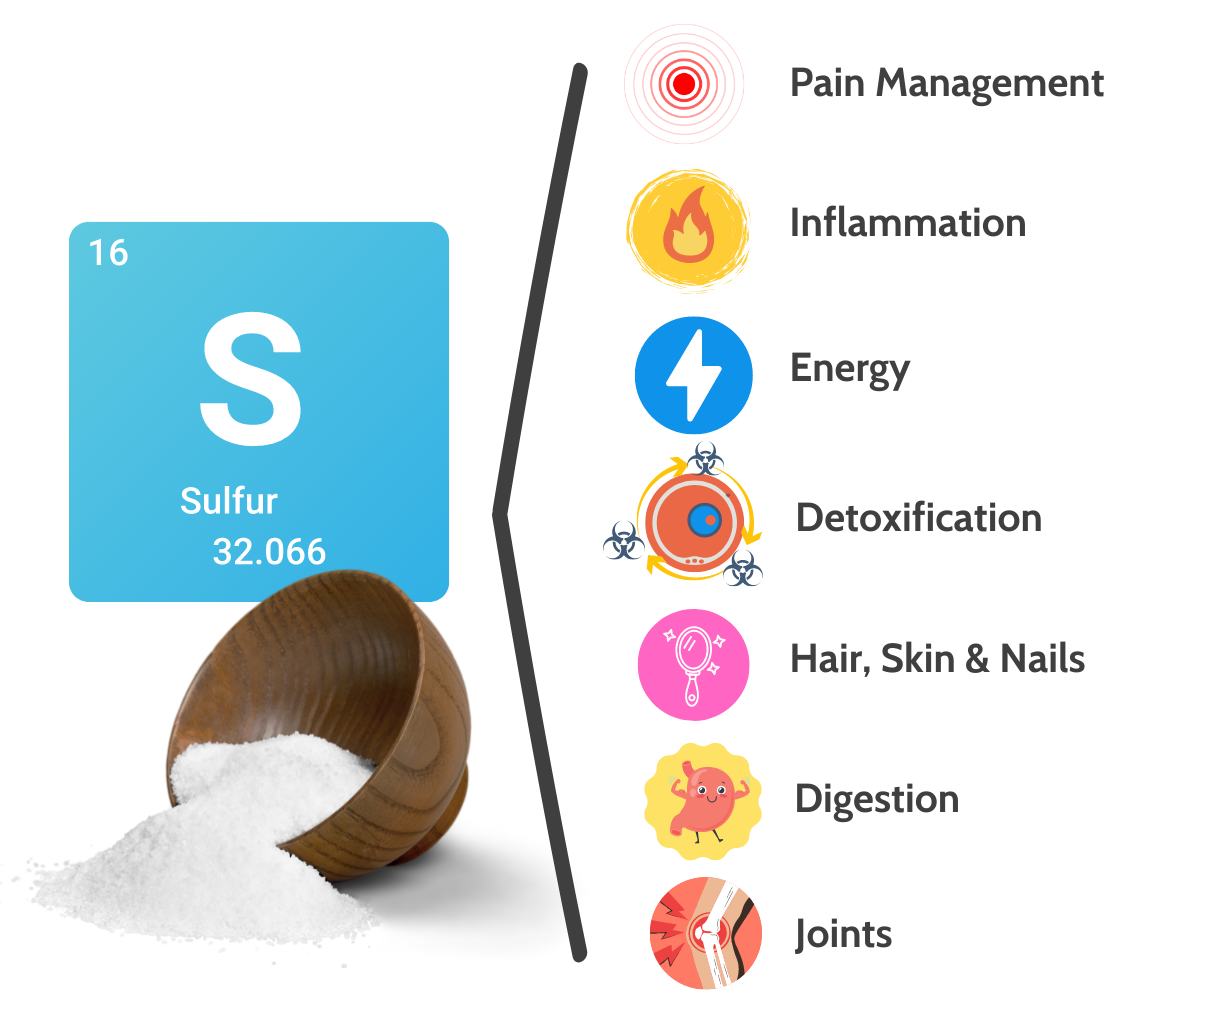 The body depends on Sulfur for many purposes